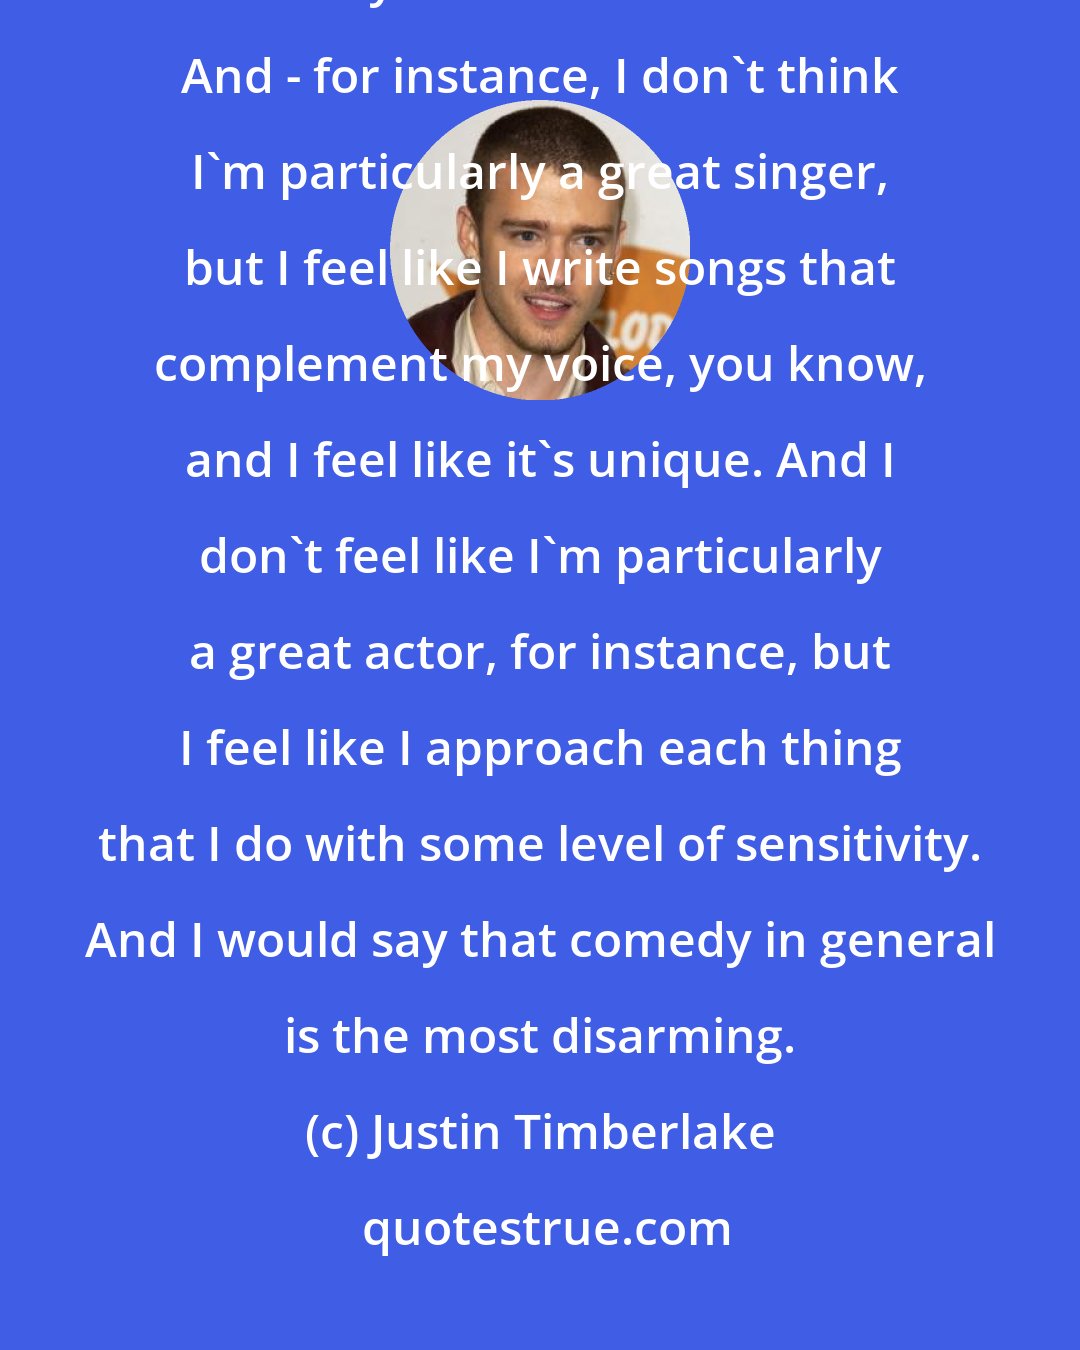 Justin Timberlake: I just feel like there's something to be said about feeling comfortable with what you have and don't have. And - for instance, I don't think I'm particularly a great singer, but I feel like I write songs that complement my voice, you know, and I feel like it's unique. And I don't feel like I'm particularly a great actor, for instance, but I feel like I approach each thing that I do with some level of sensitivity. And I would say that comedy in general is the most disarming.